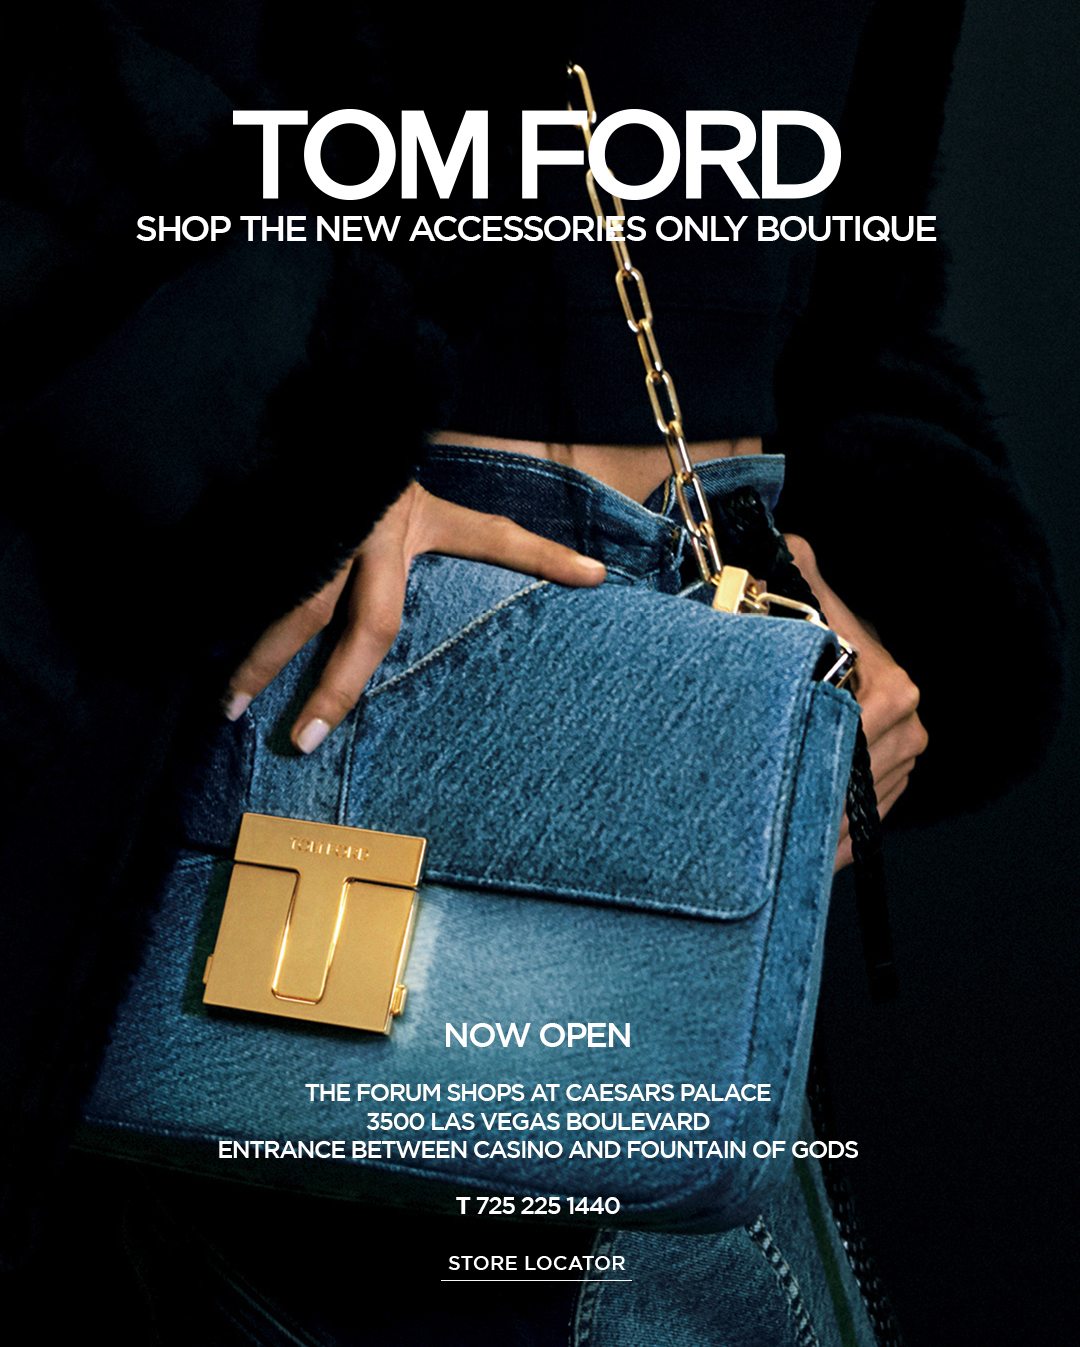 TOM FORD ACCESSORIES ONLY BOUTIQUE OPENING DECEMBER 19TH, 2020 AT THE FORUM SHOPS AT CAESARS PALACE IN LAS VEGAS.